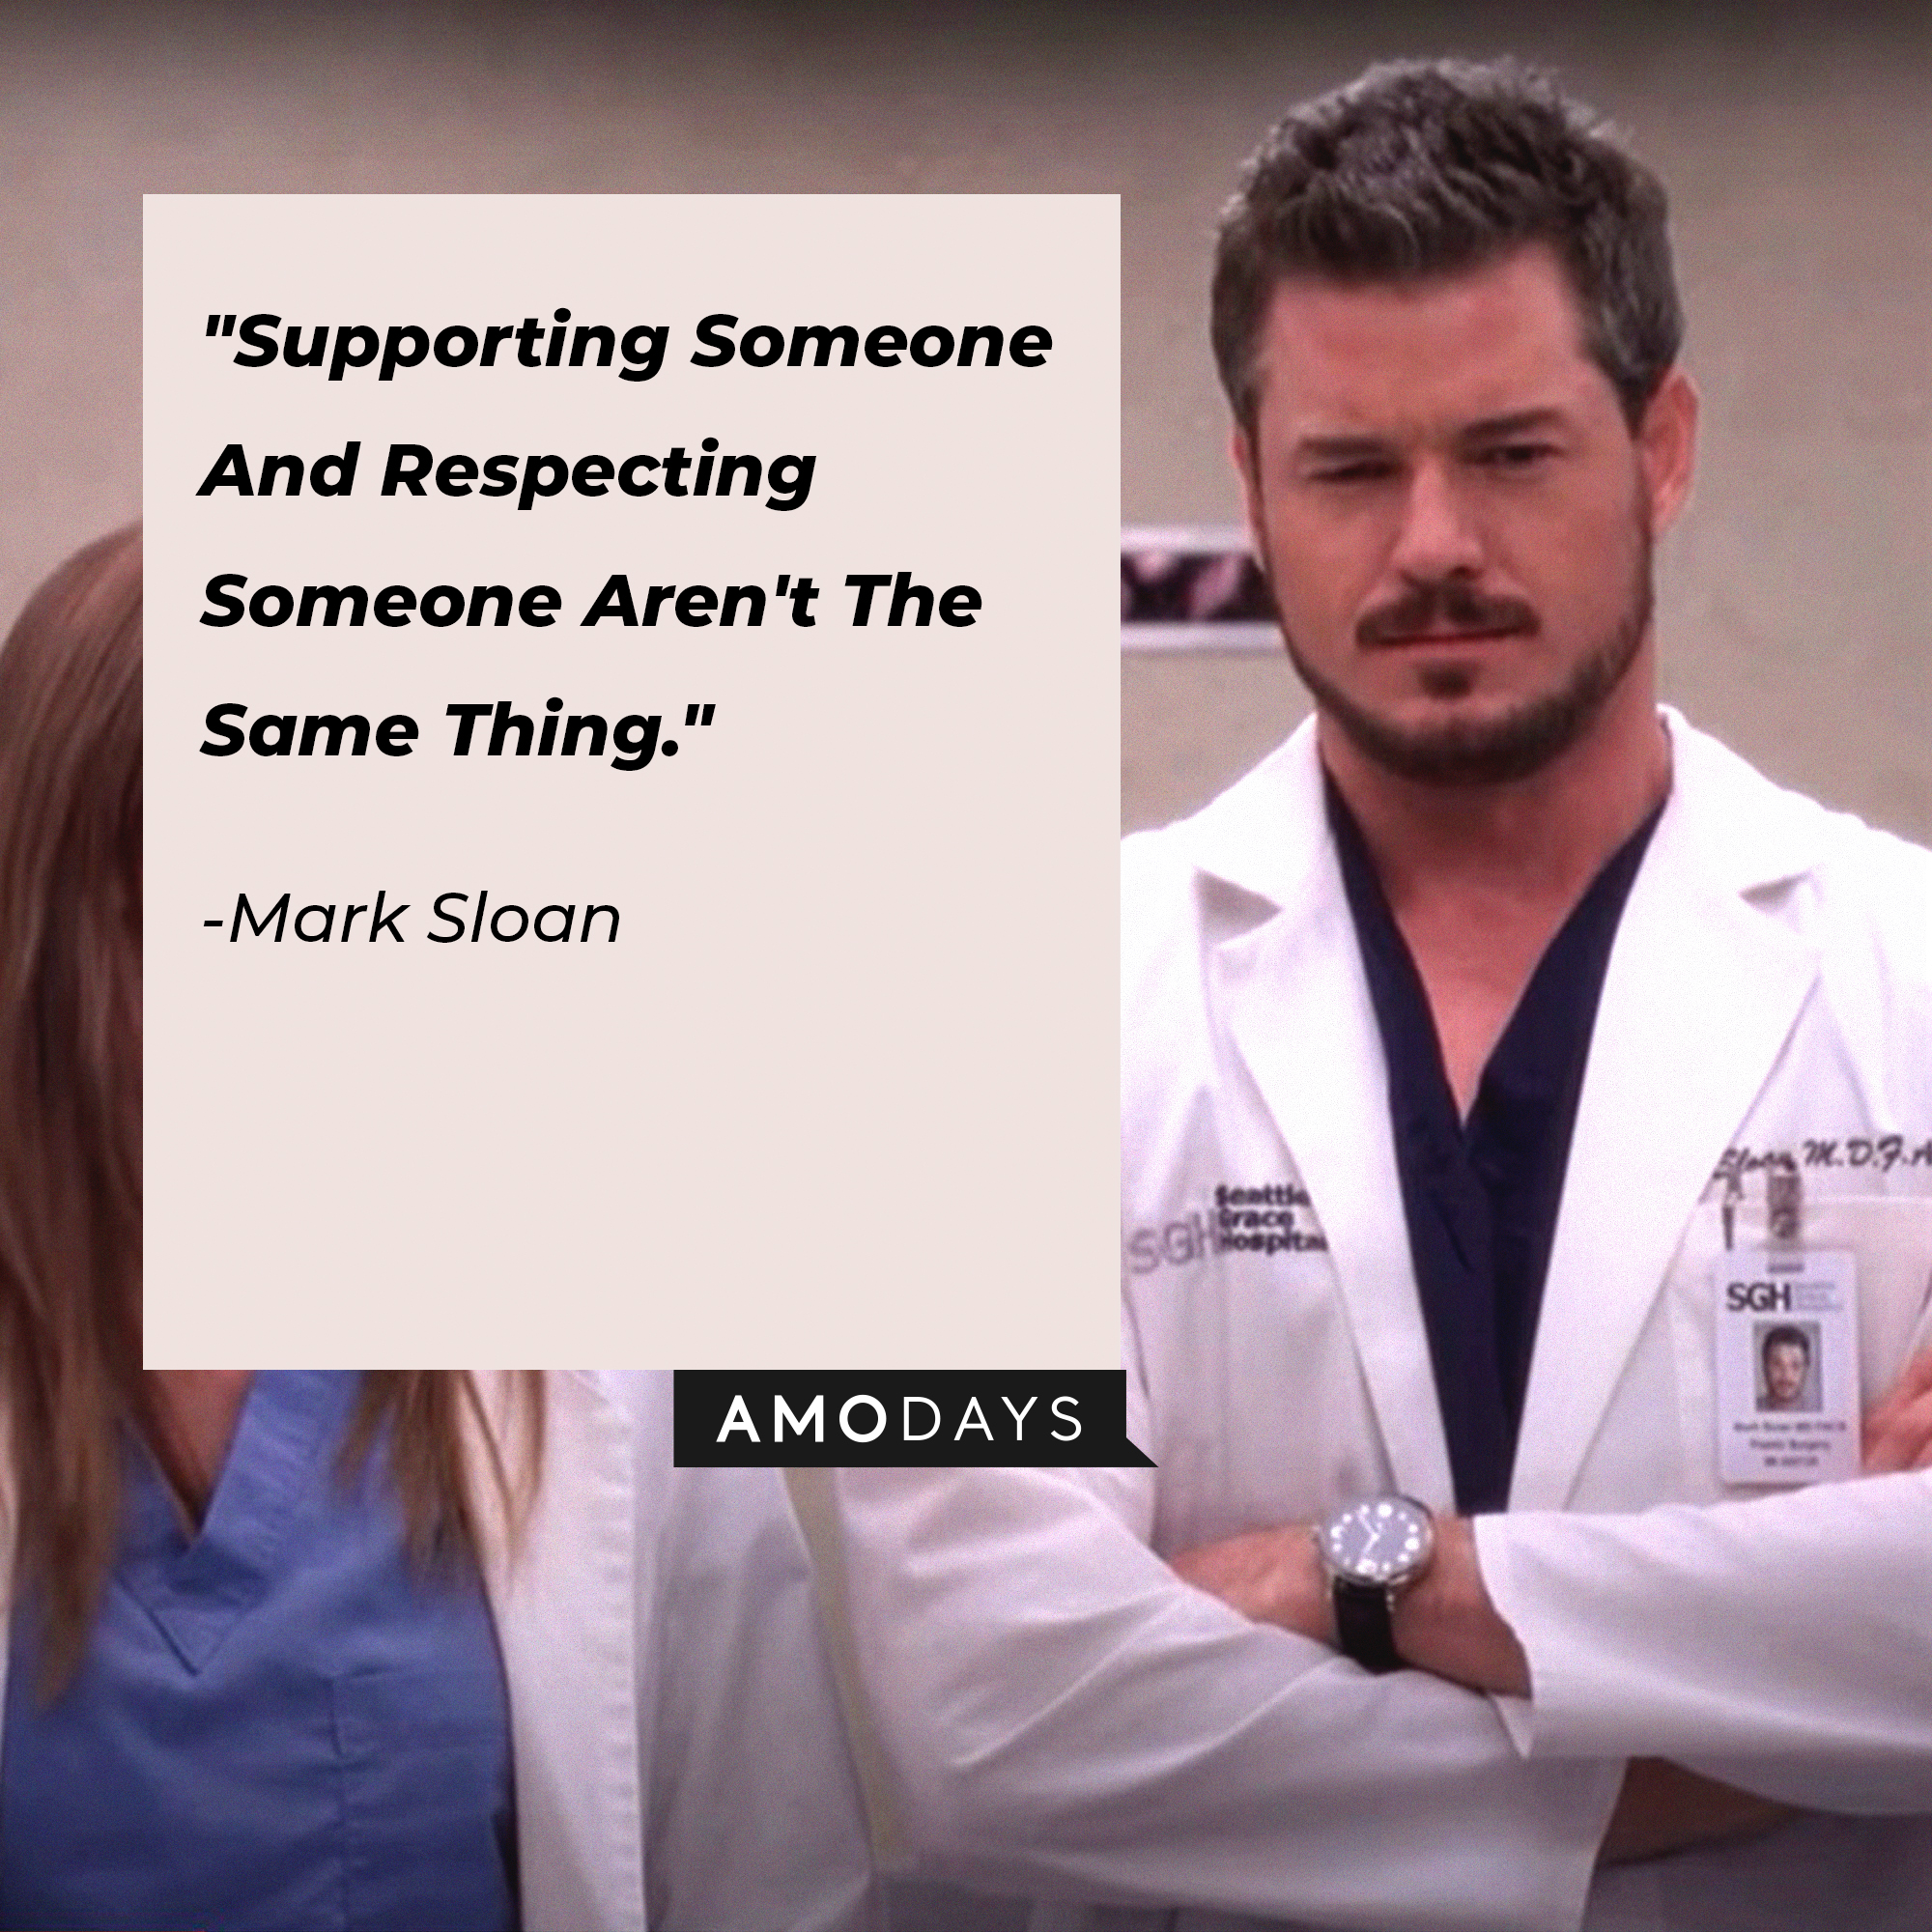 Mark Sloan's quote: "Supporting Someone And Respecting Someone Aren't The Same Thing." | Image: AmoDays